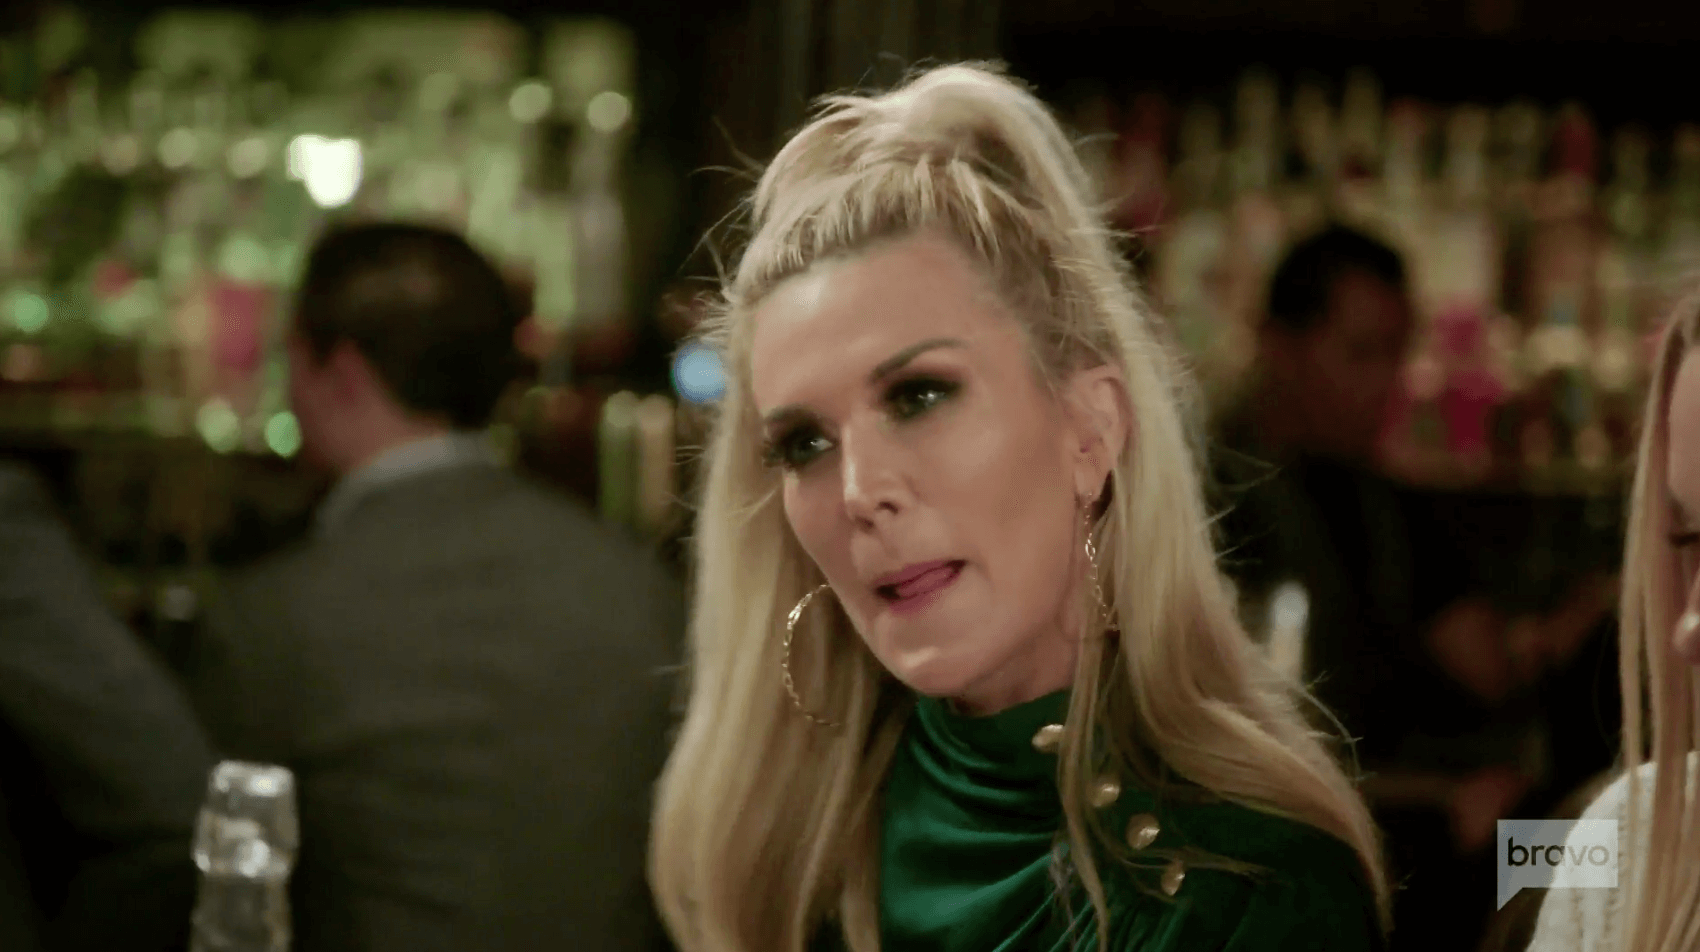 ‘RHONY’ RECAP: Tinsley Mortimer Announces She’s Back With Scott & The Ladies Clown Her!